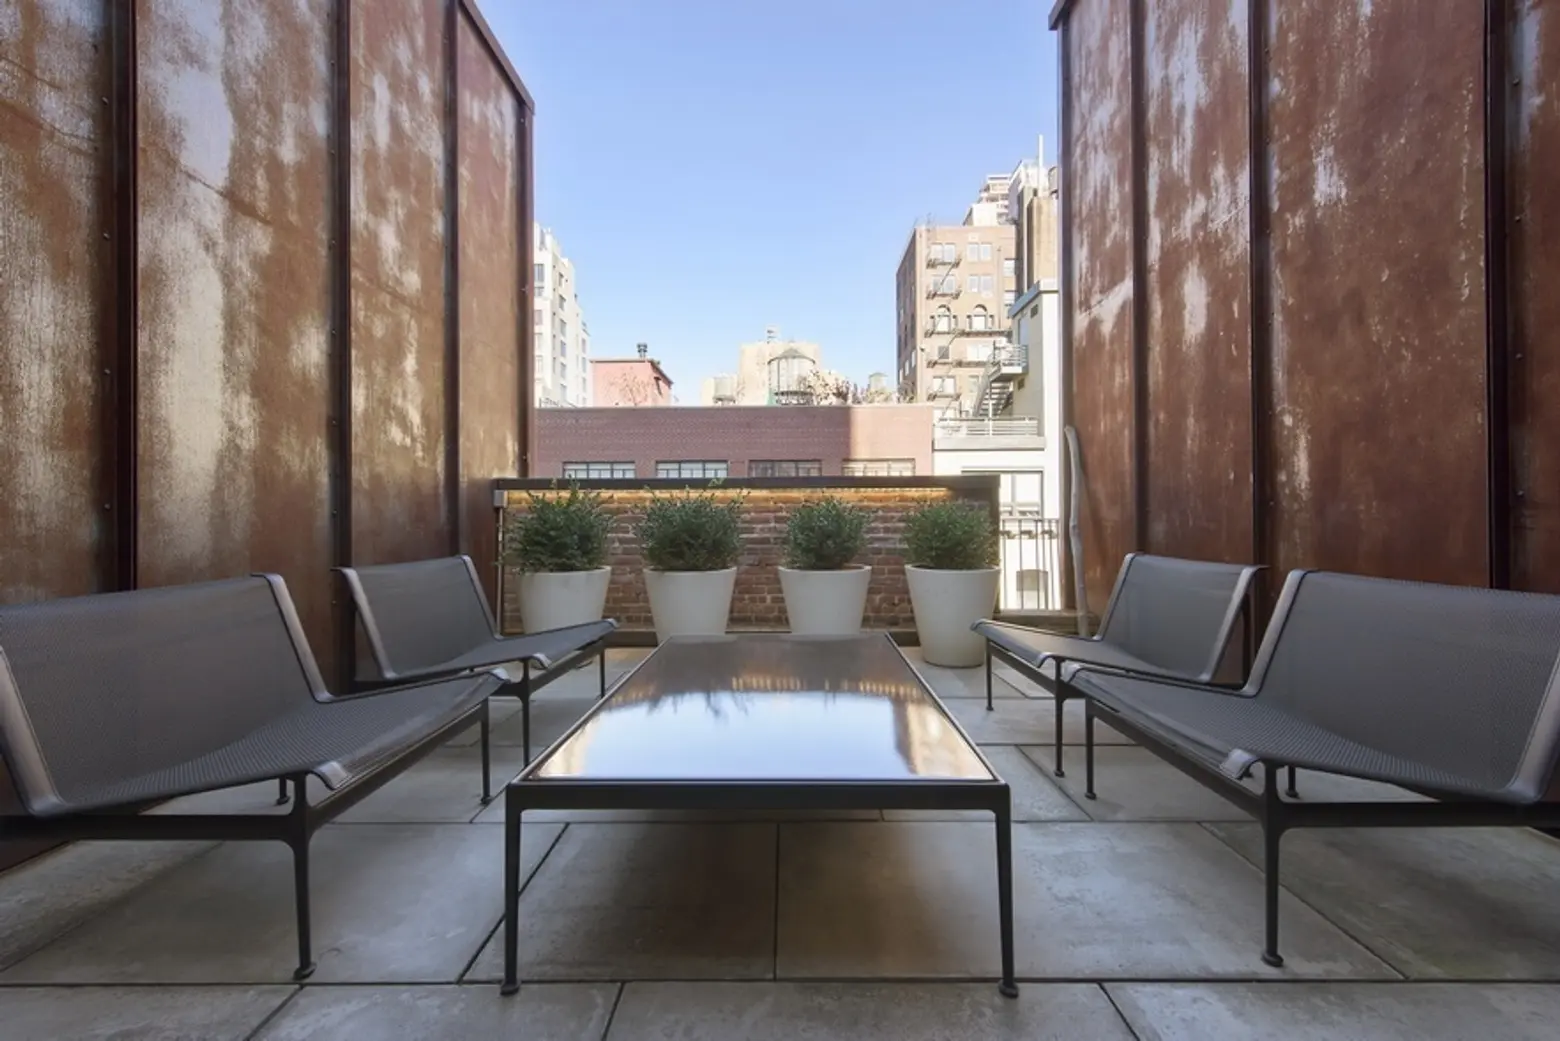 75 Warren Street, Tribeca, Townhouse, Interiors, Architecture, Dean Wolf Architects, Inverted Warehouse Townhouse, Corten, cool listings, manhattan townhouse for sale, modern townhouse